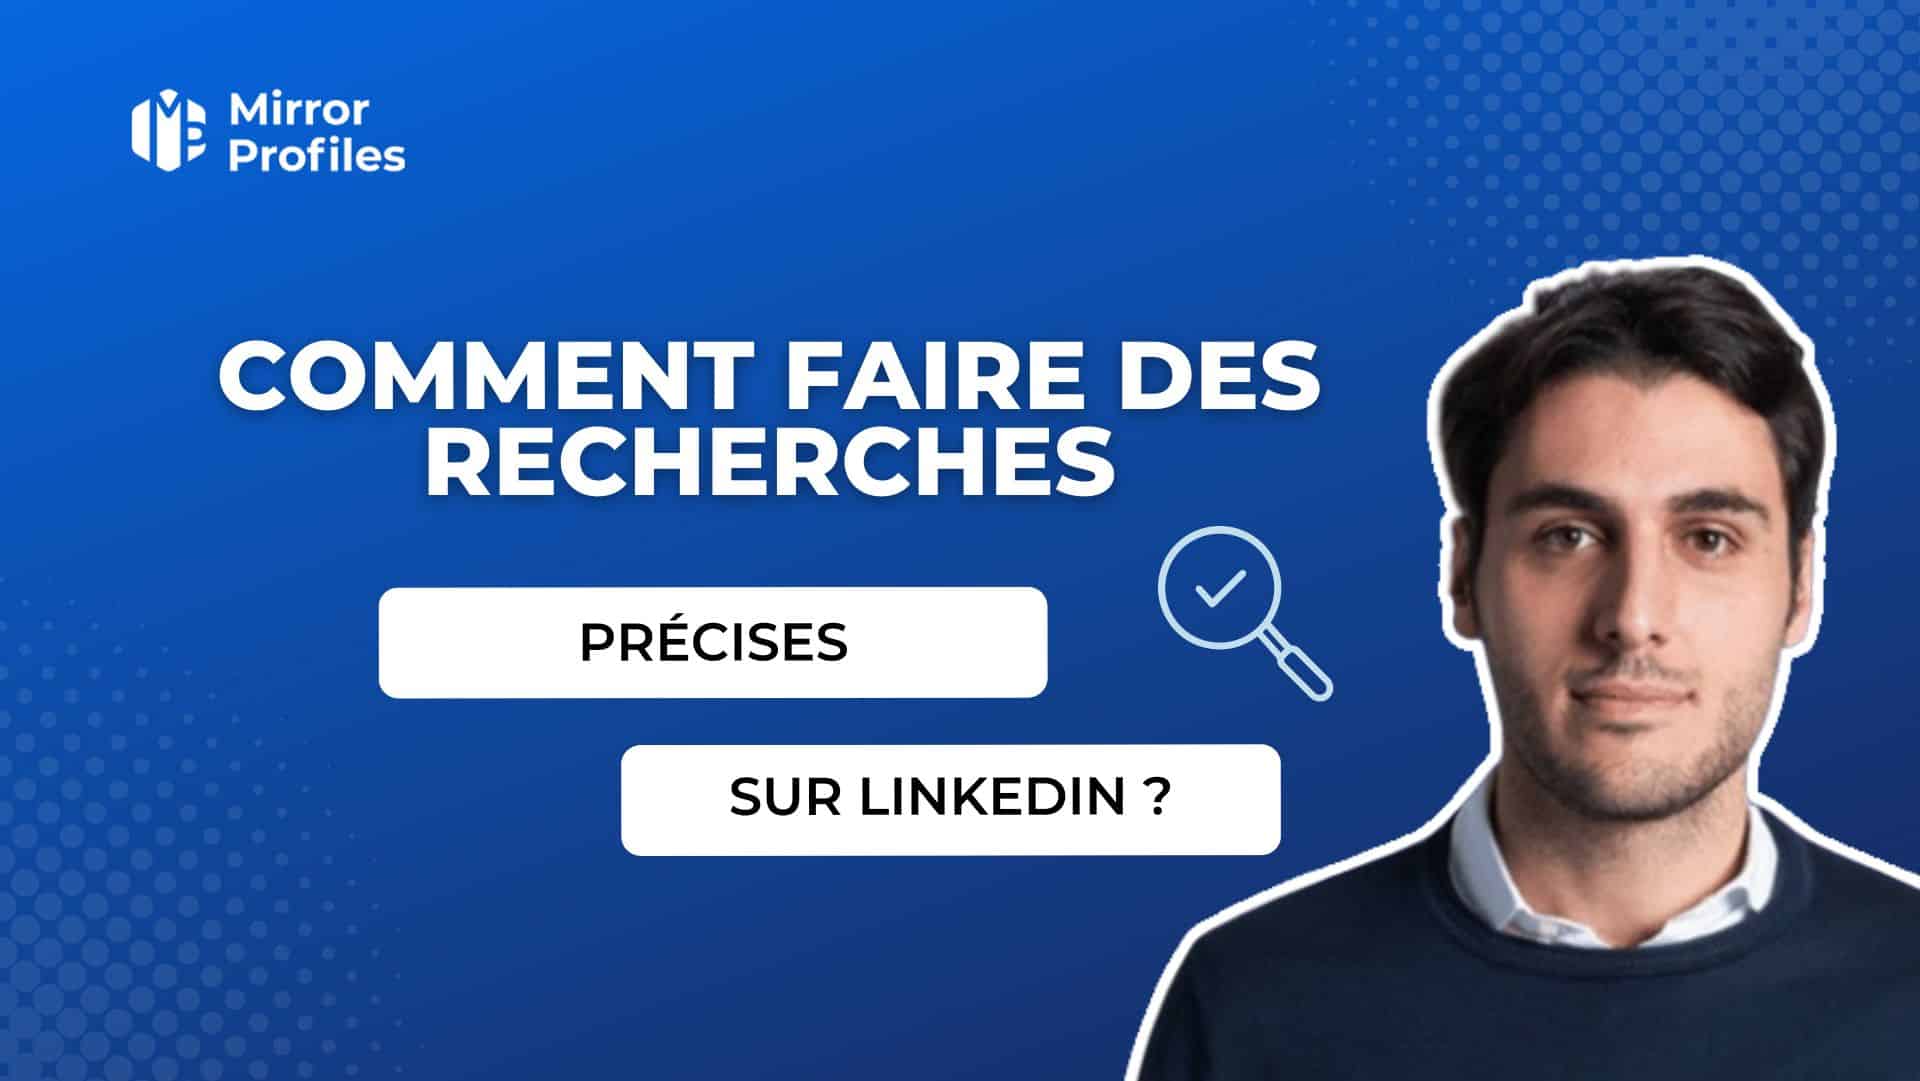 A man in a blue sweater is featured on a blue background with the text "COMMENT FAIRE DES RECHERCHES PRÉCISES SUR LINKEDIN ?" and a company logo "Mirror Profiles." Learn how to do accurate LinkedIn searches for better results.